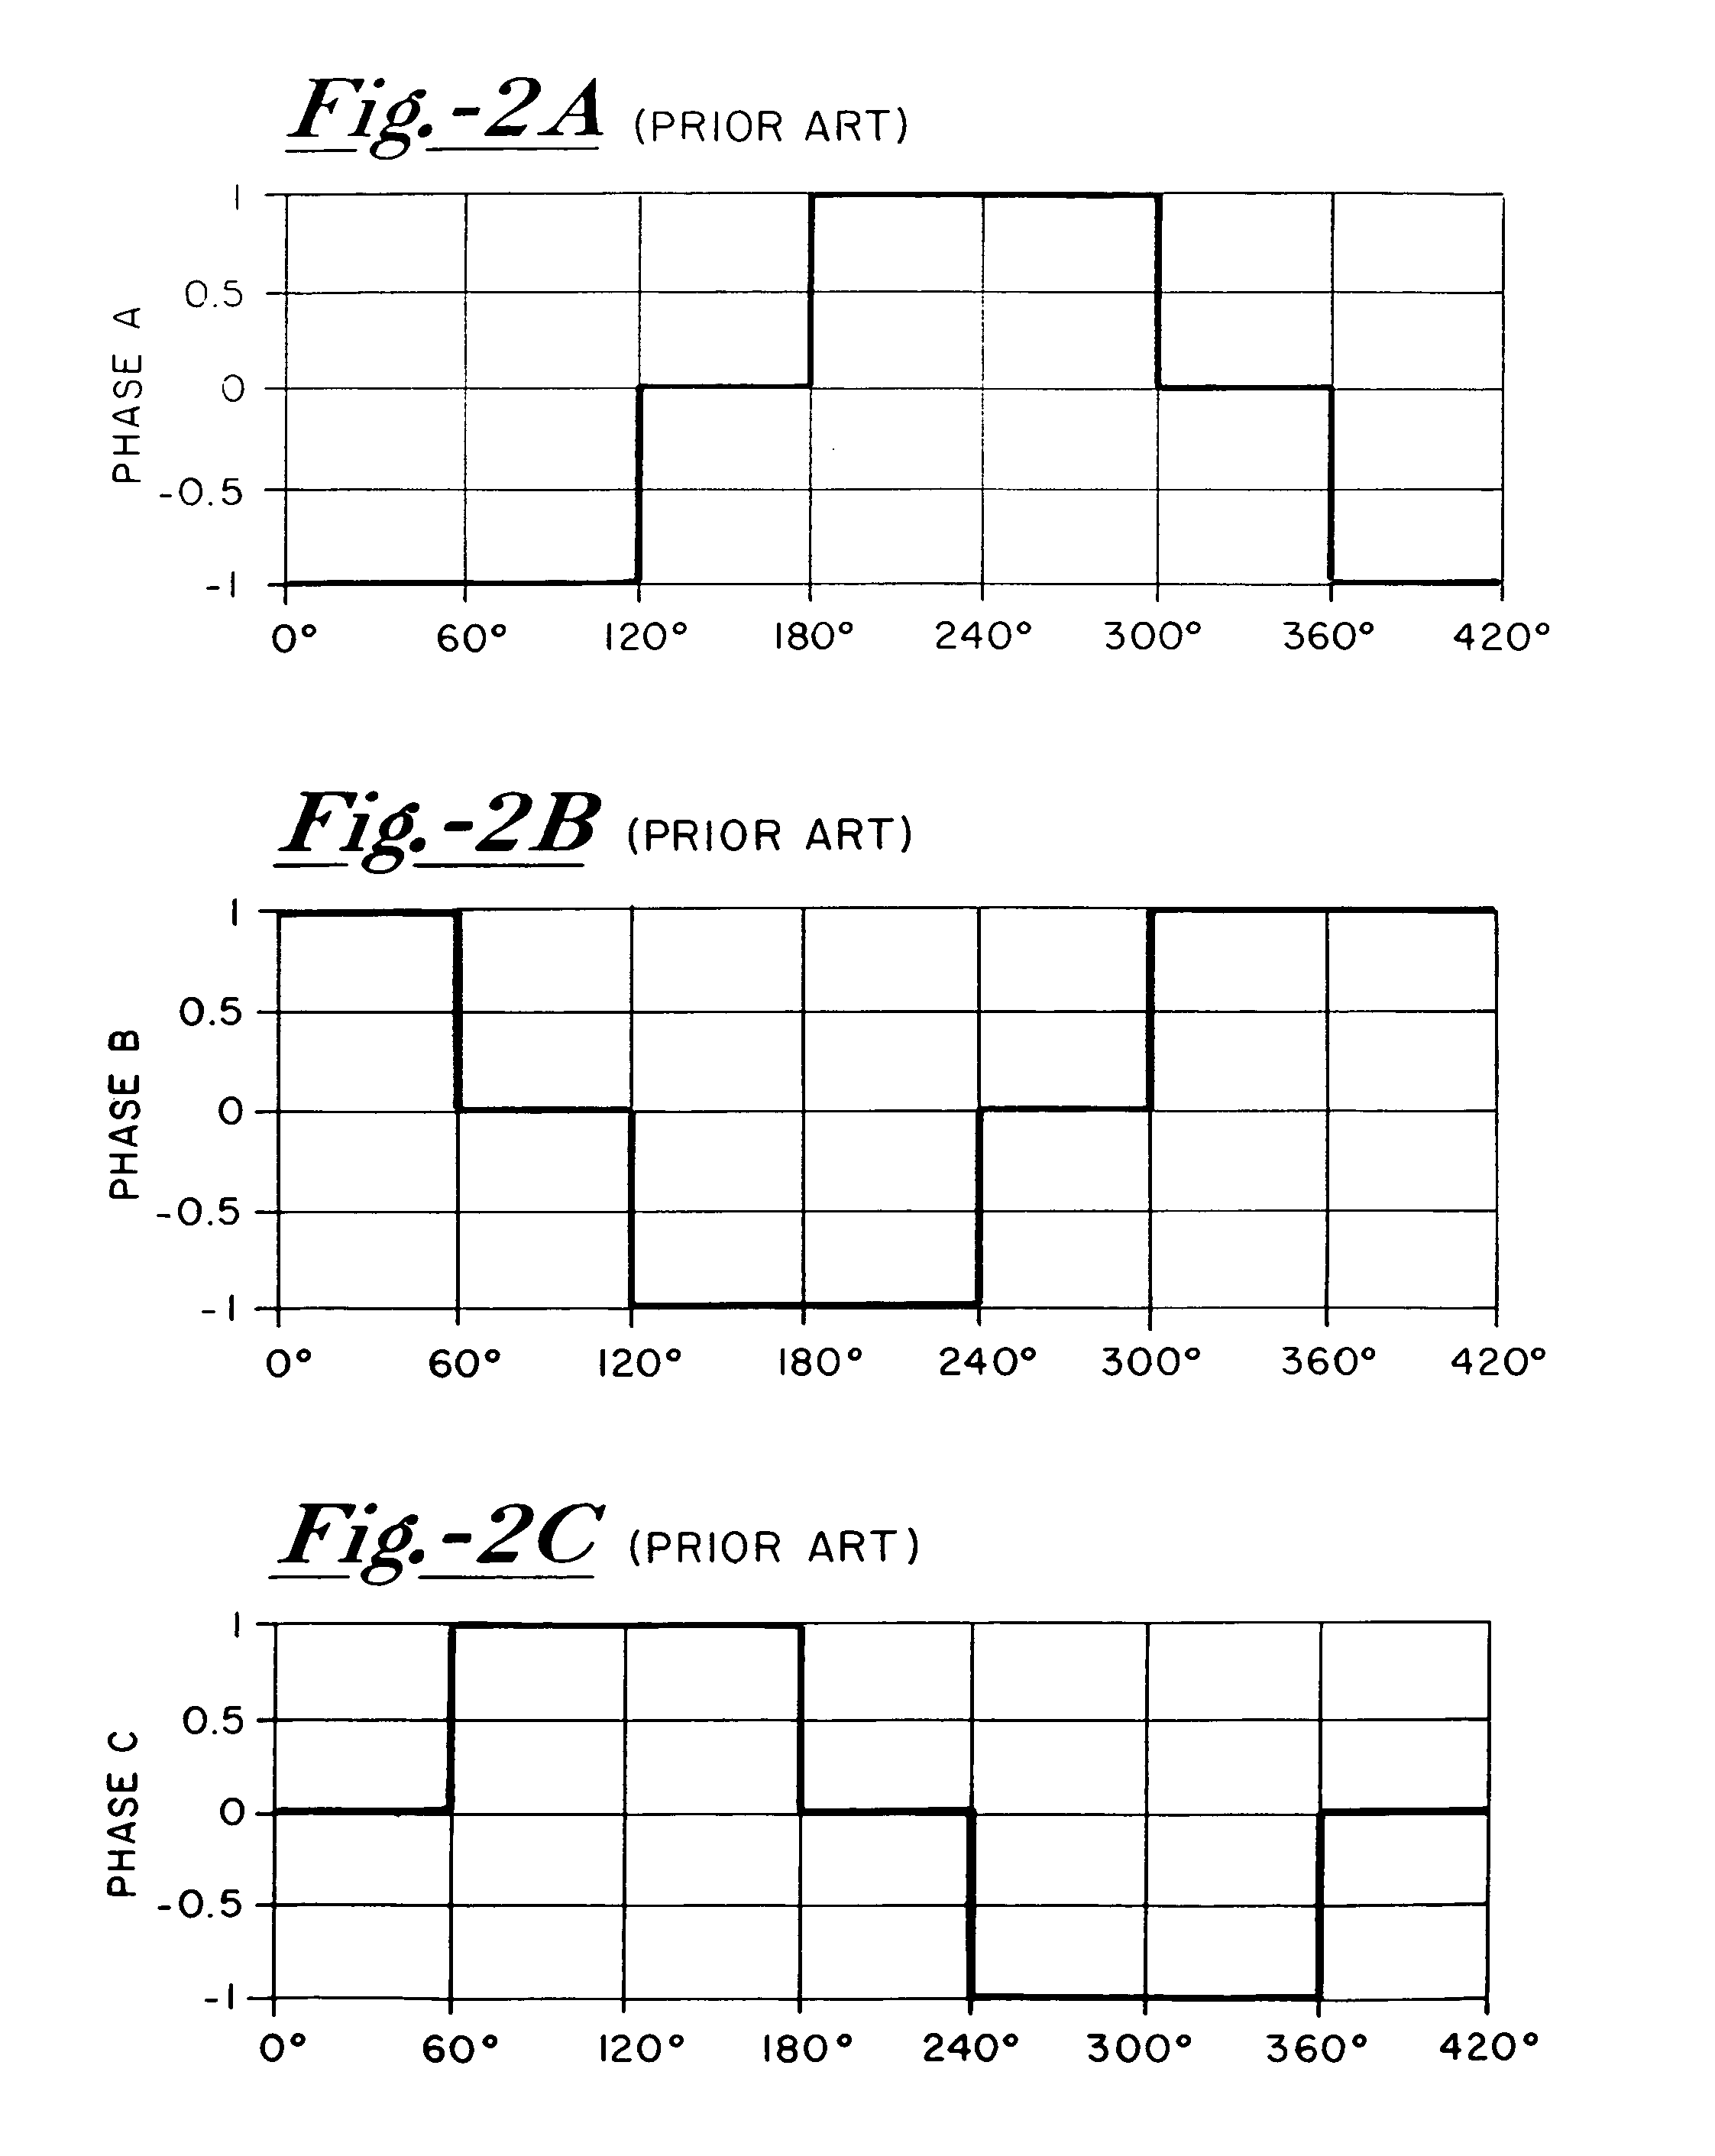 Brushless DC motor with reduced current ripple